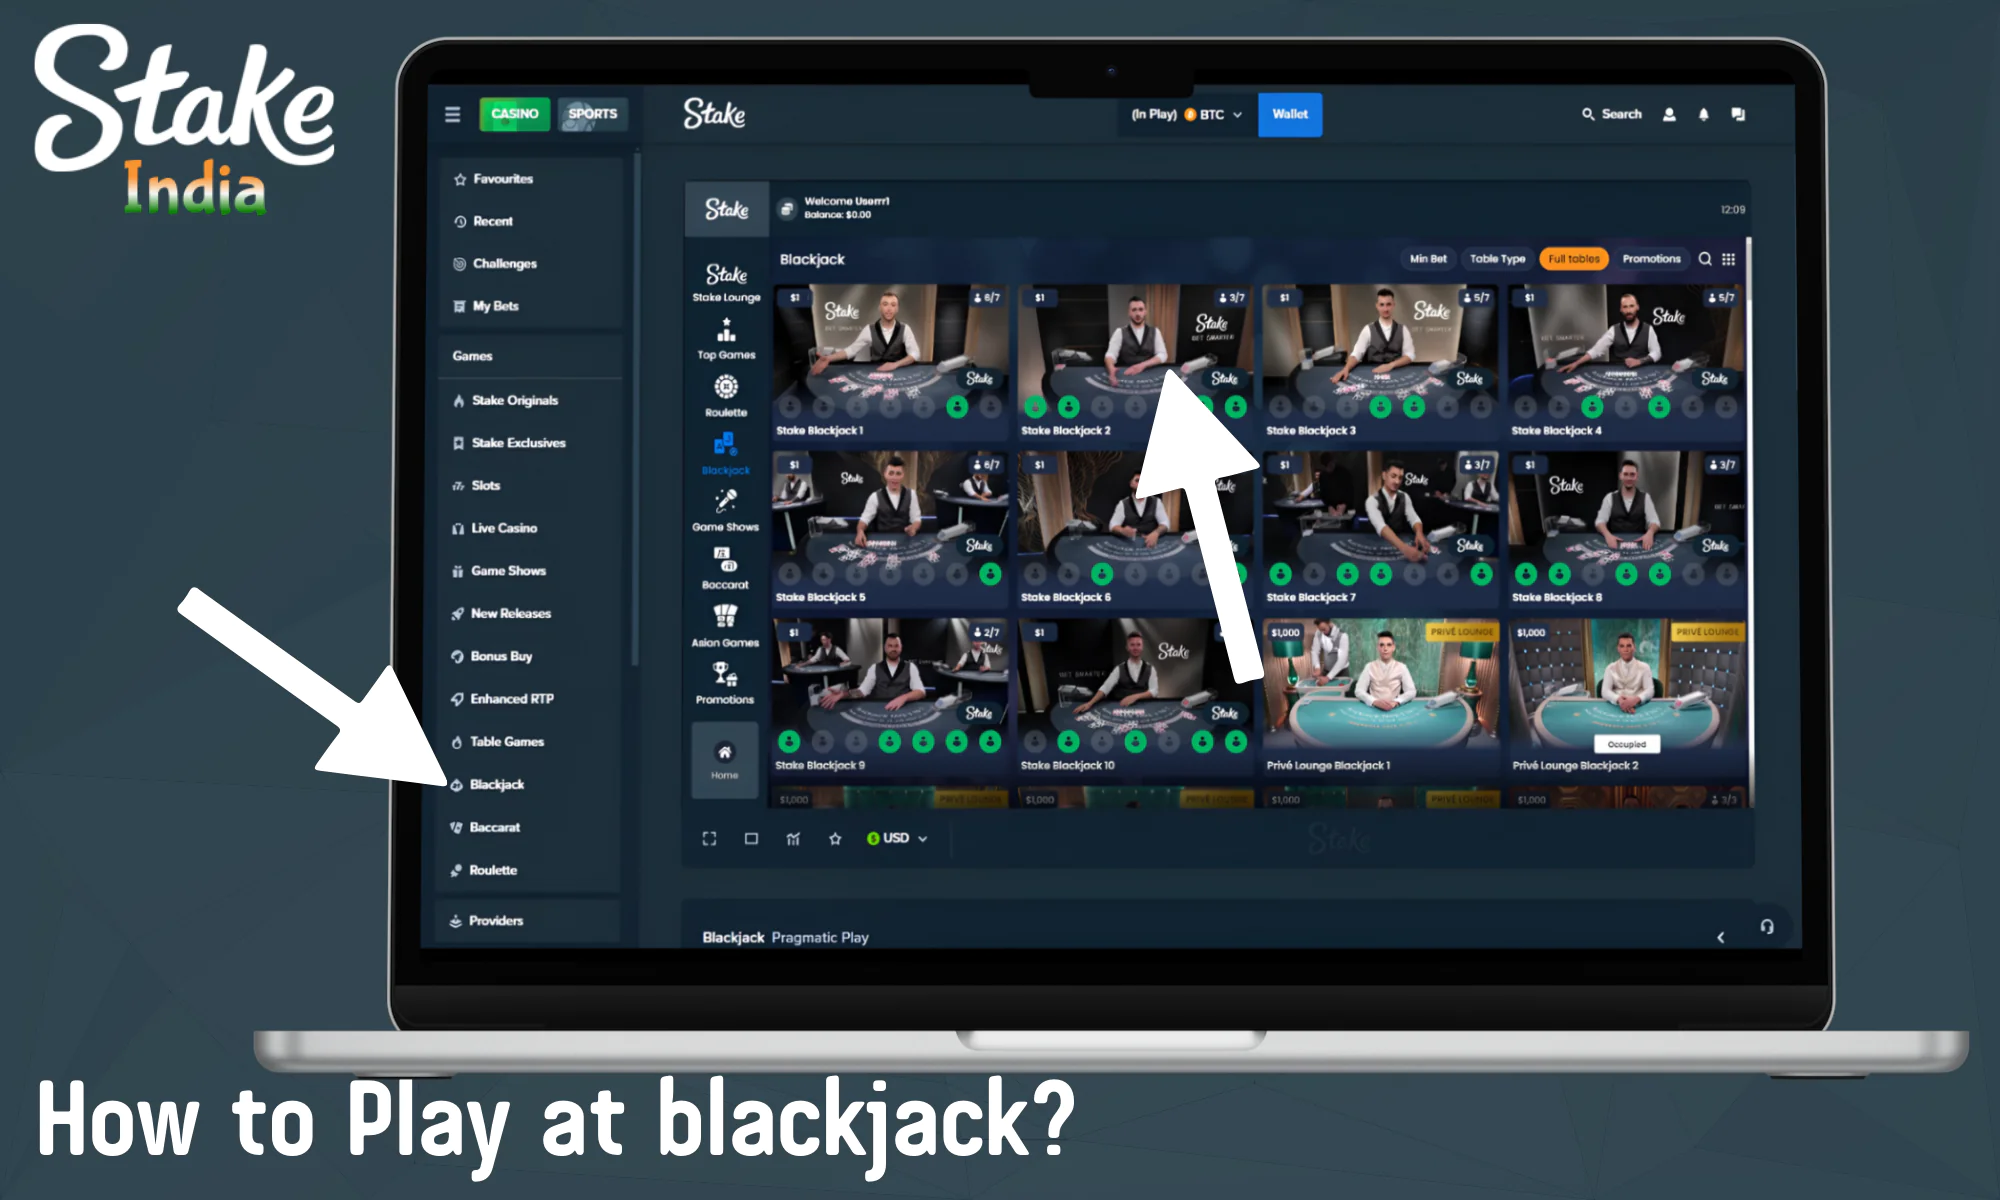 Step-by-step instructions on how to start playing at Blackjack Stake casino